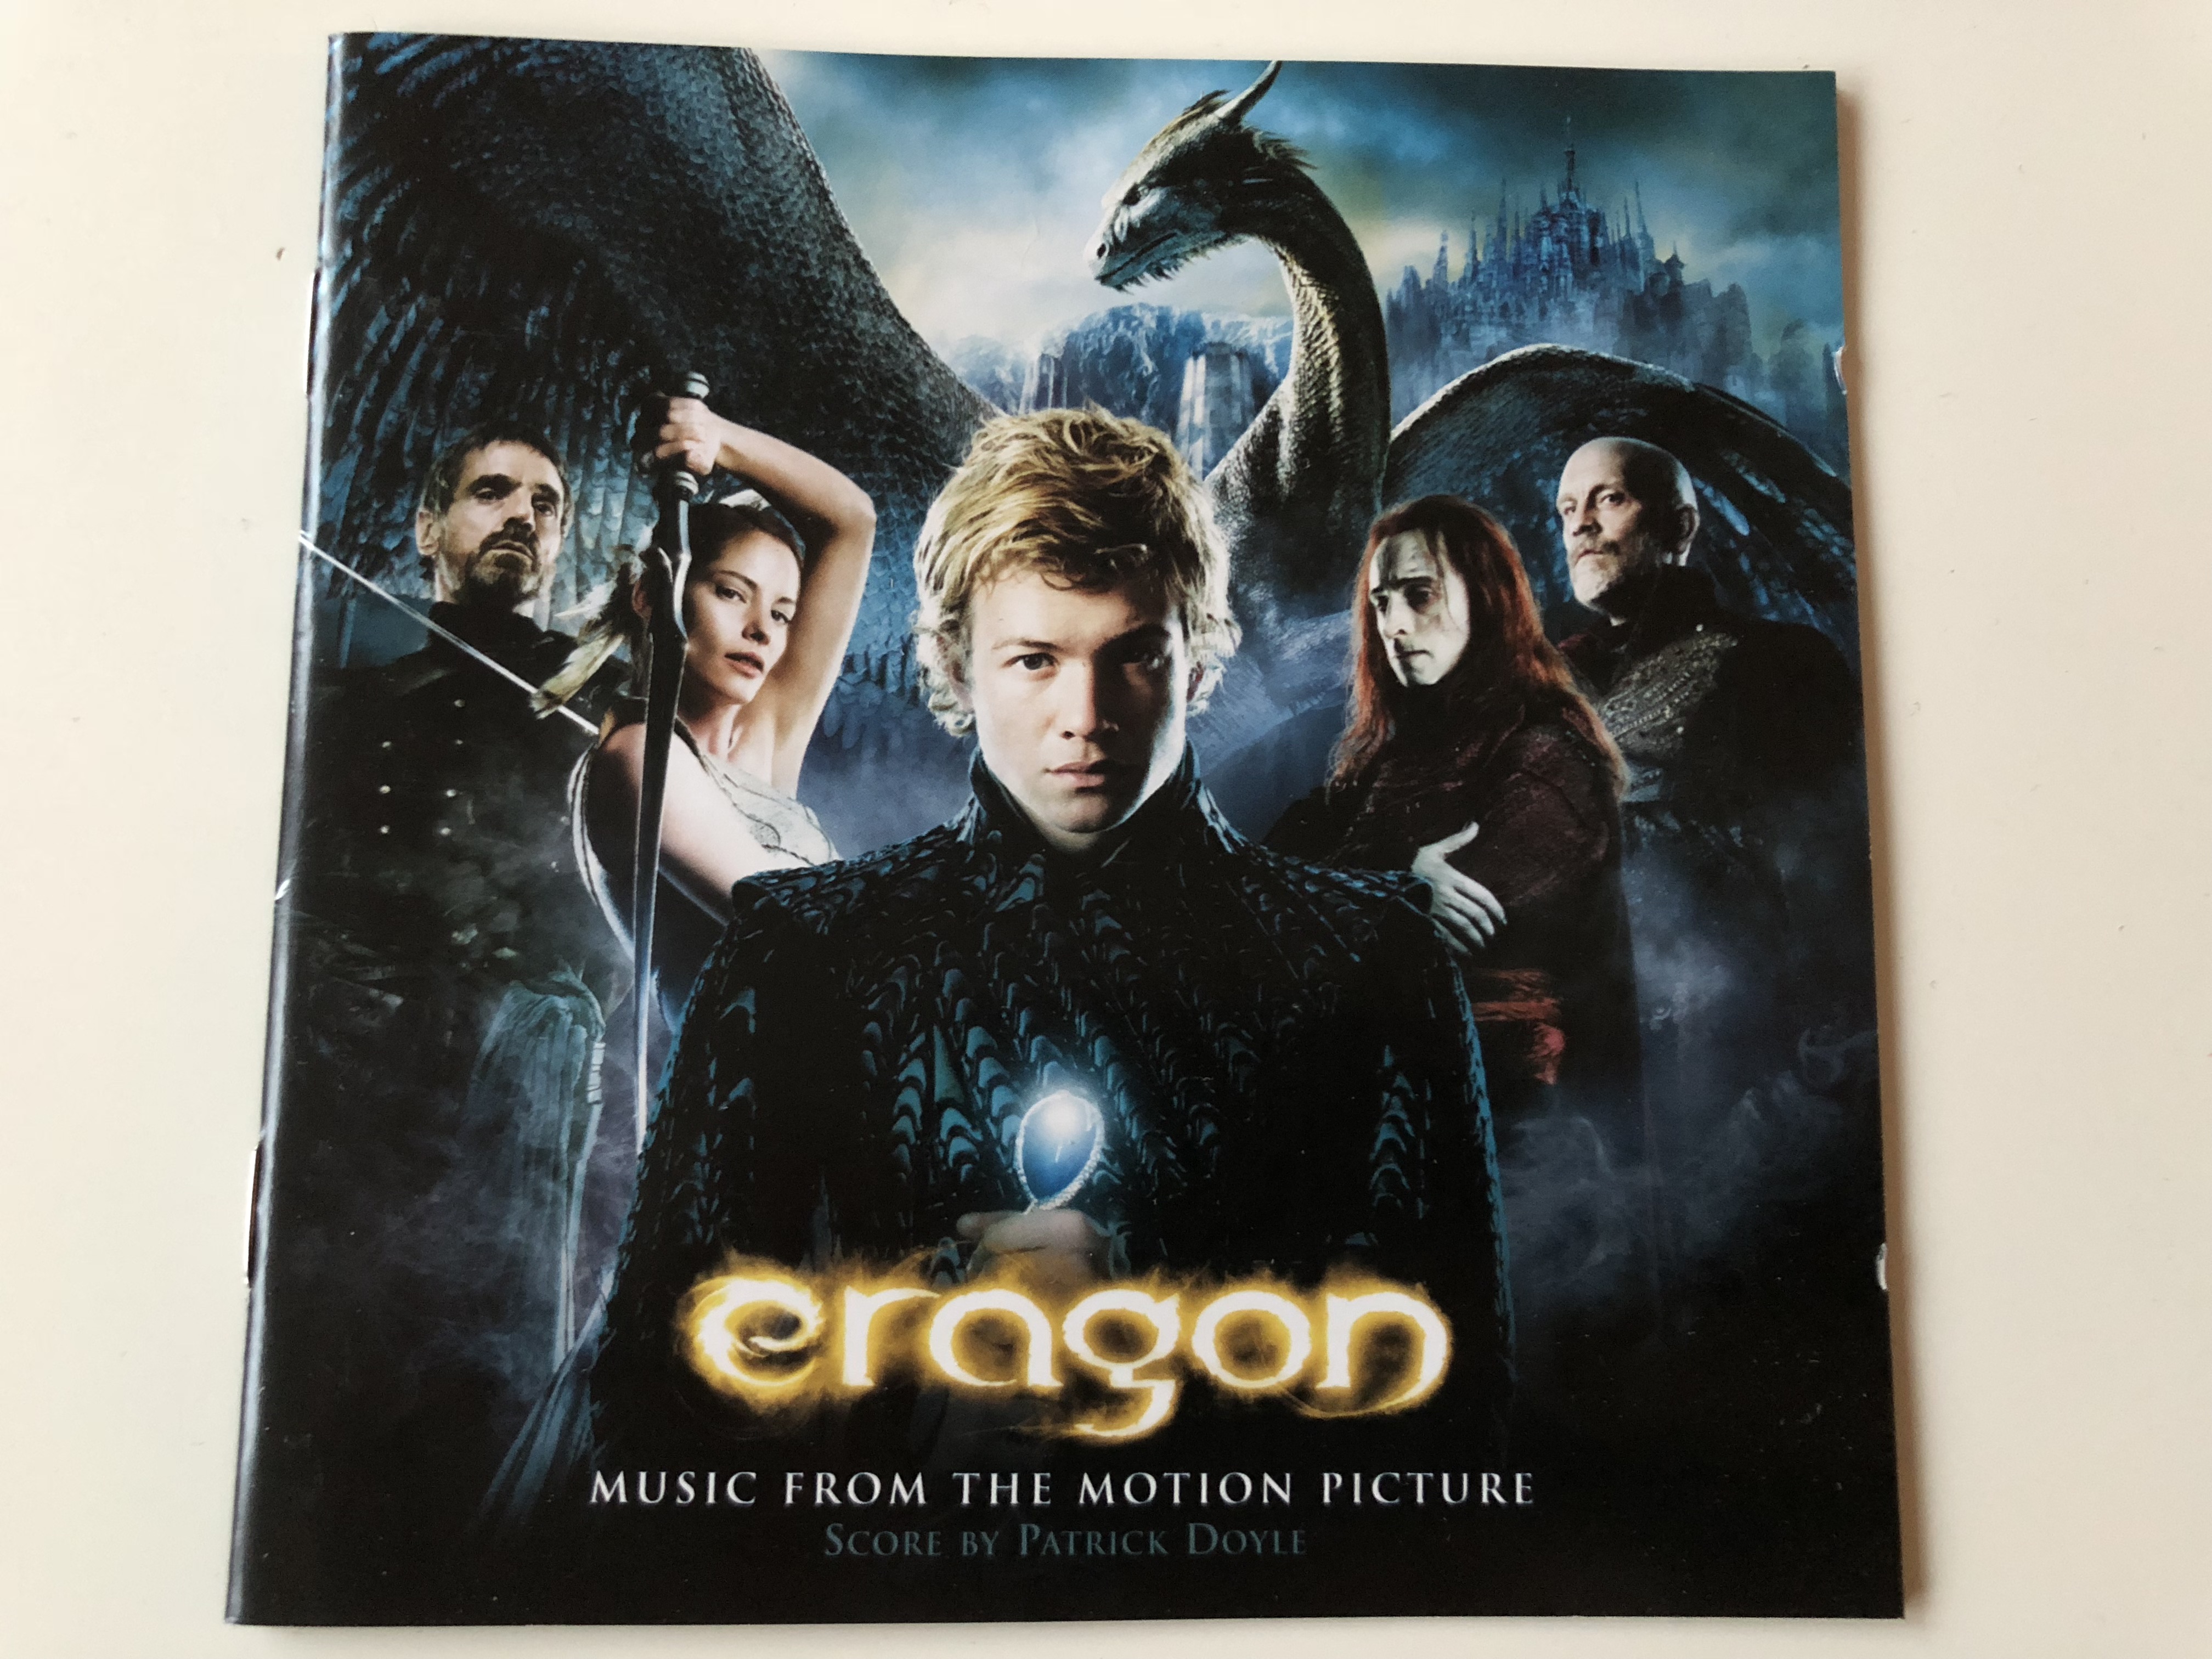 eragon-music-from-the-motion-picture-score-by-patrick-doyle-audio-cd-2006-rca-records-1-.jpg